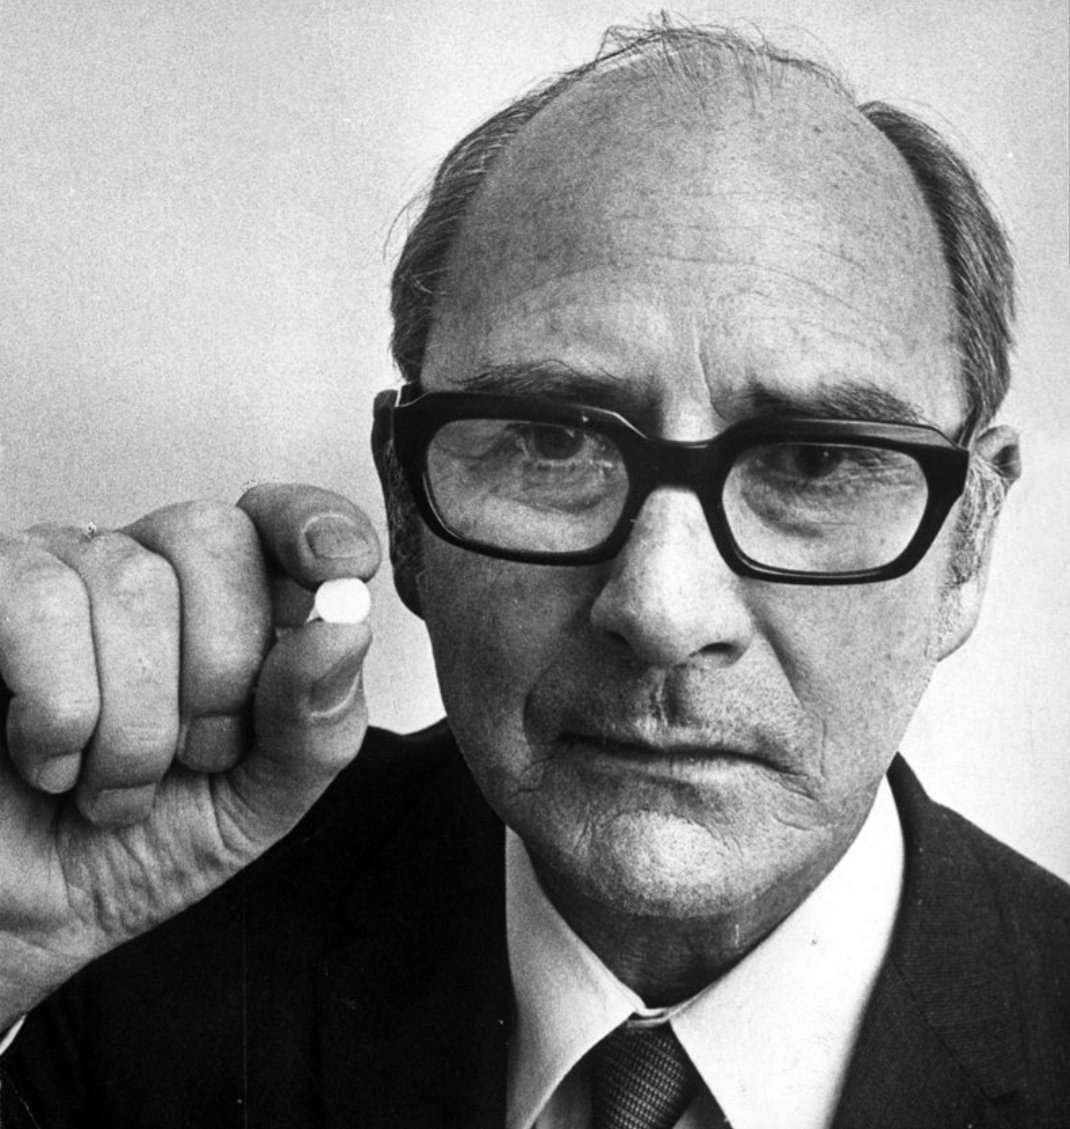 John Cade, An Australian psychiatrist discovered that Lithium calmed guinea pigs and was effective & safe as a medication for bipolar D after testing it on himself, one of the first effective psychiatric medications. Its a WHO essential medication & was previously in 7up drinks.